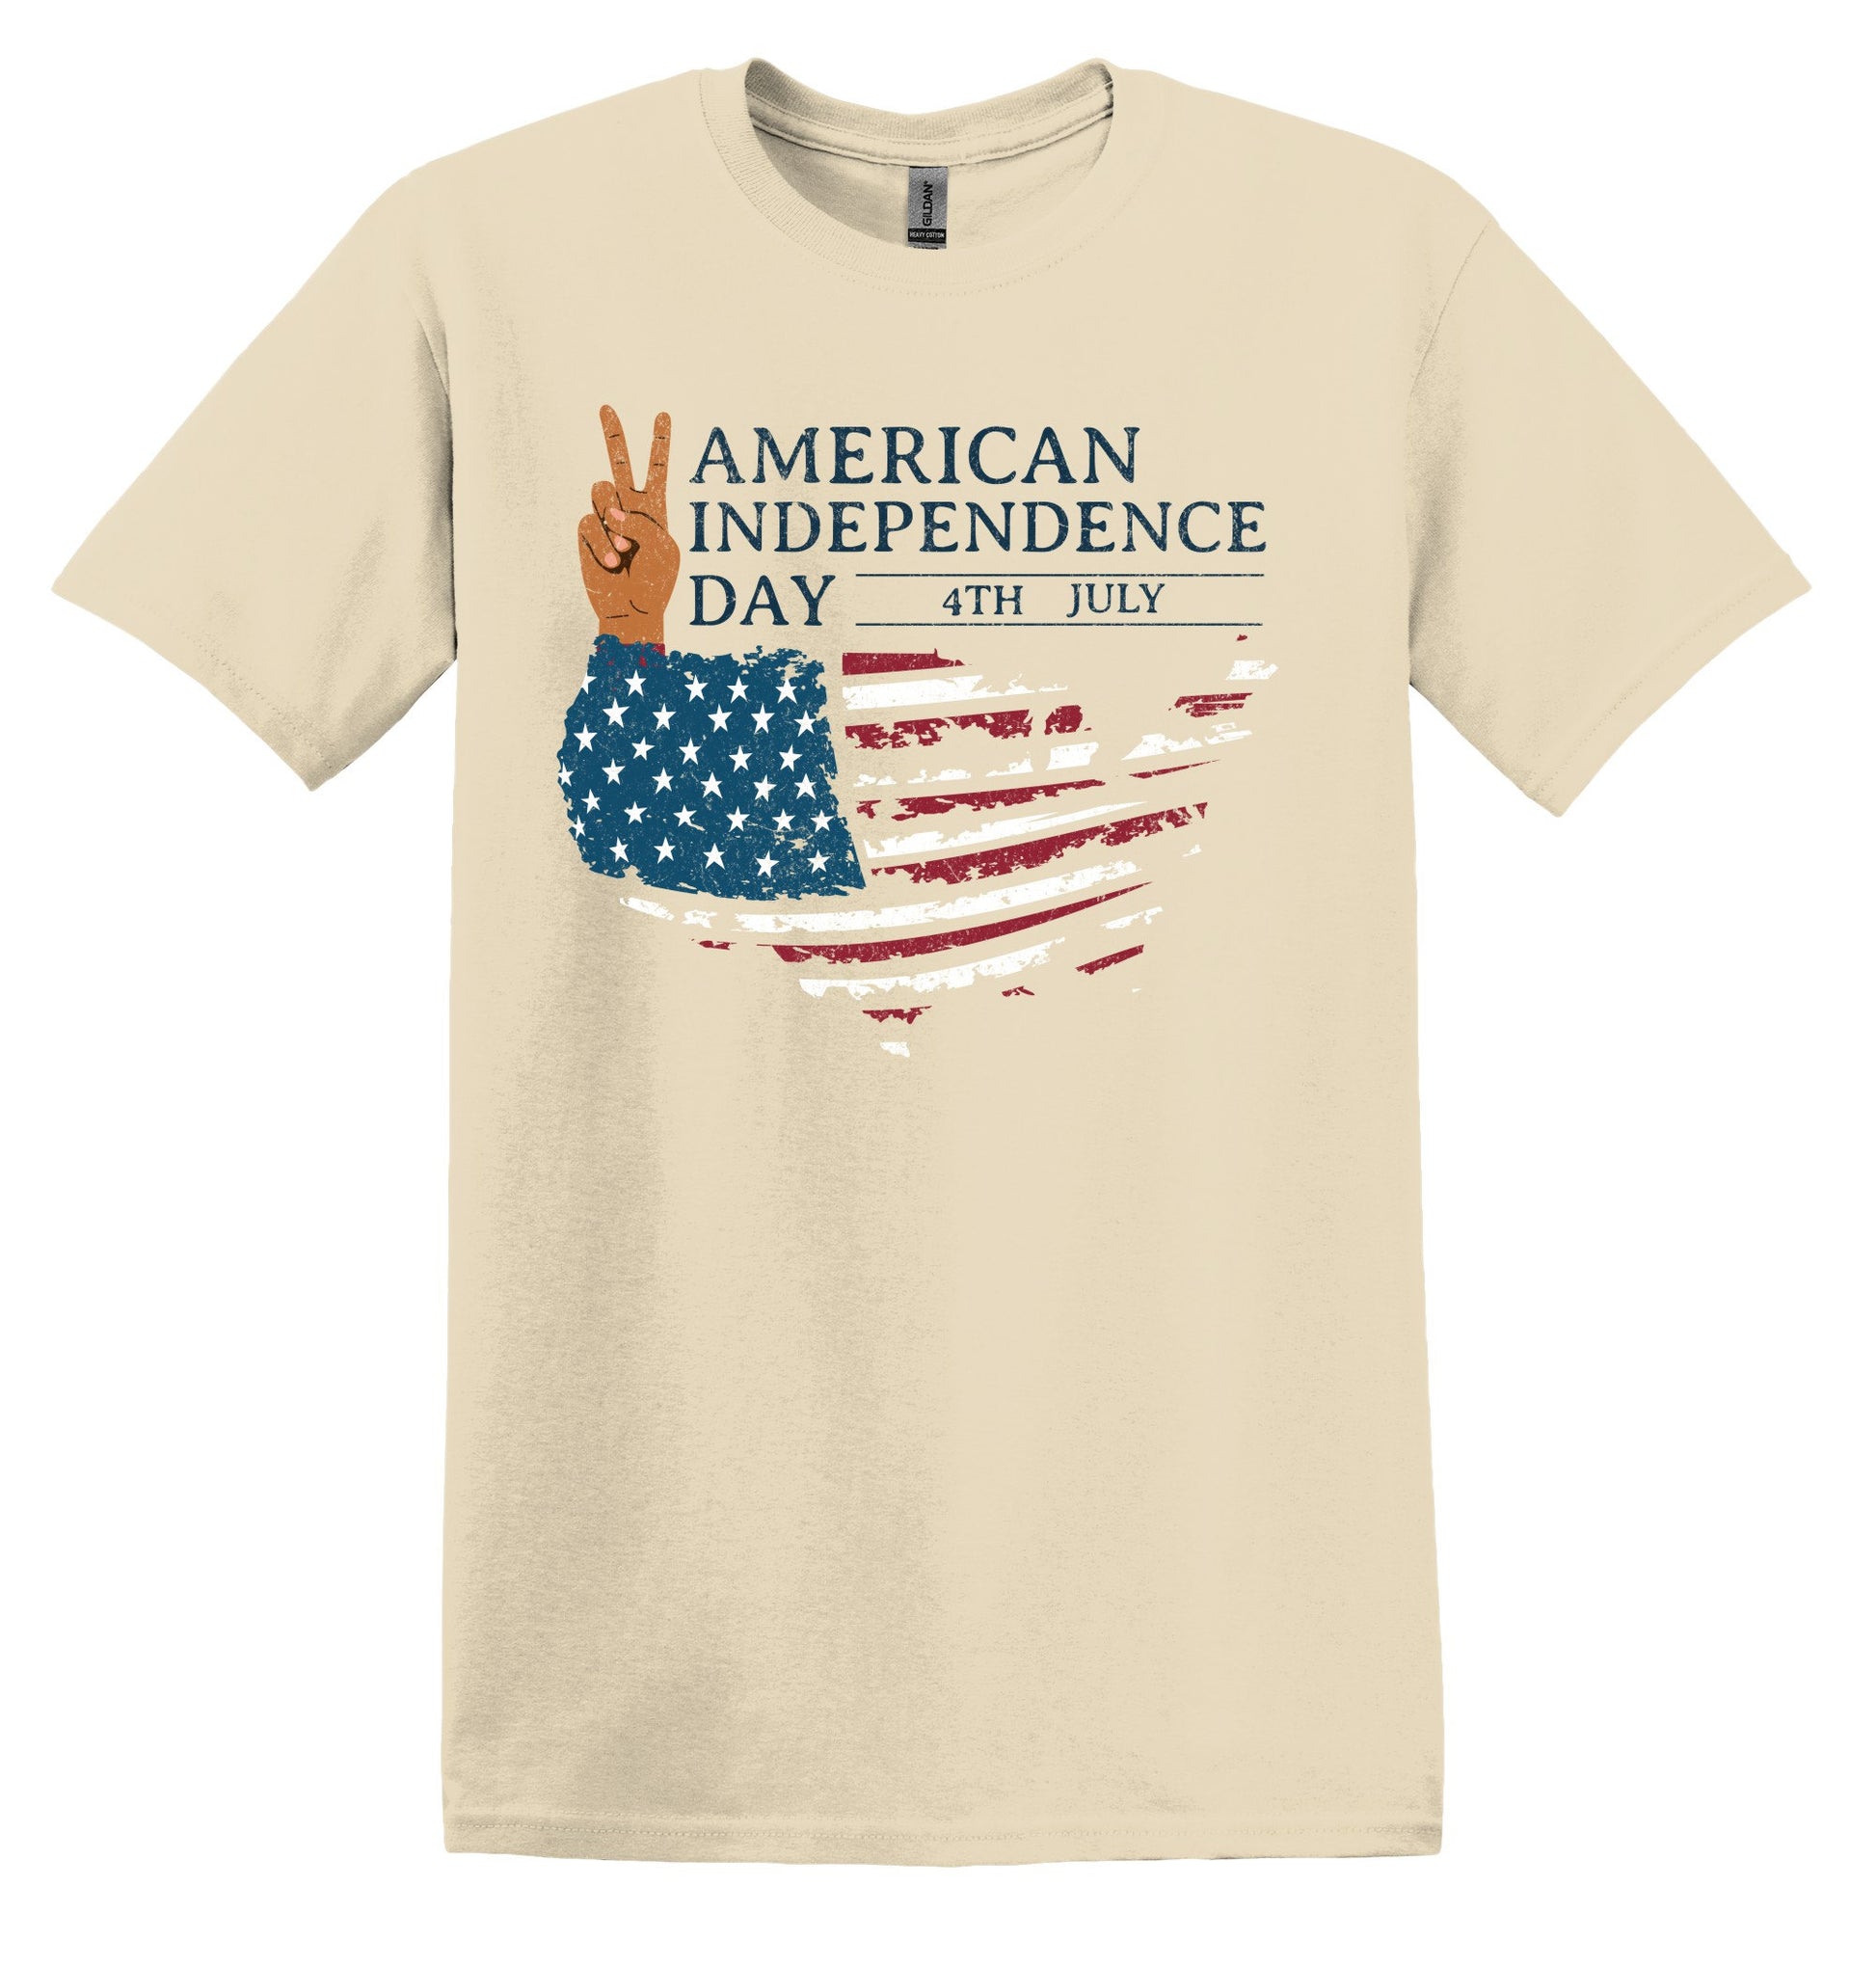 American Independence Day July 4th Shirt July 4th Shirt Fourth of July Shirt July 4th Top Independence Day Shirt